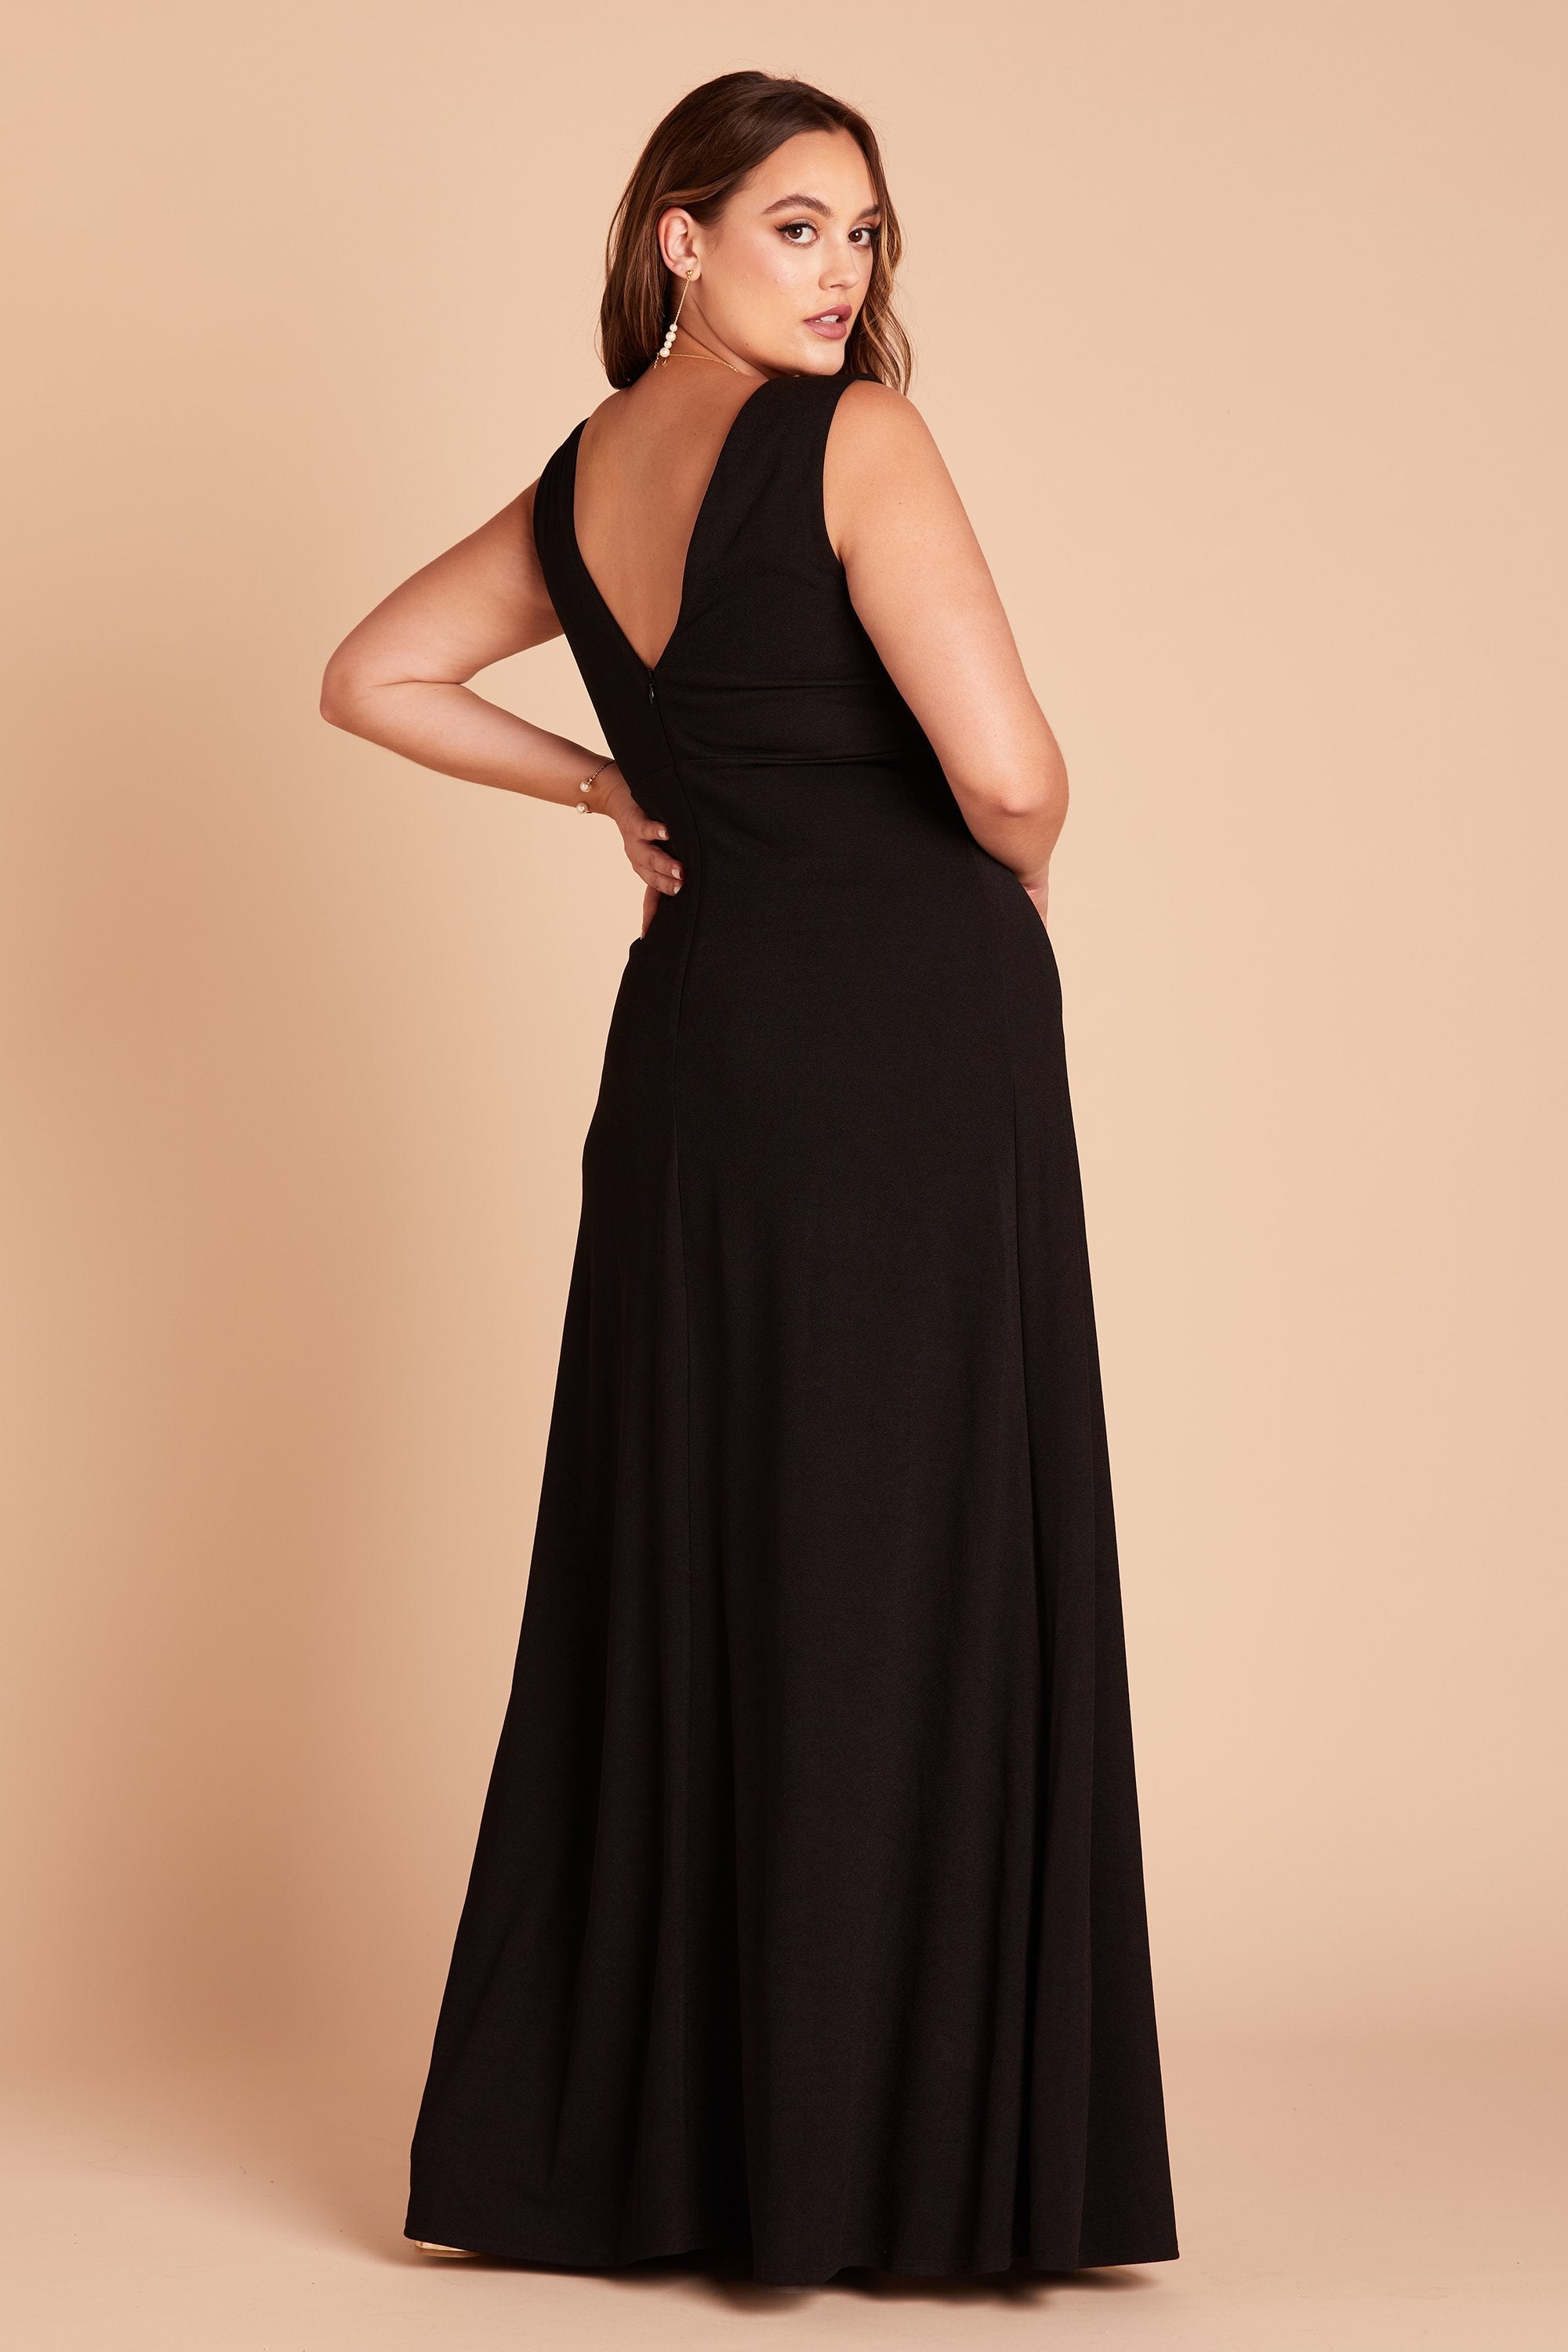 Shamin plus size bridesmaid dress in black crepe by Birdy Grey, side view